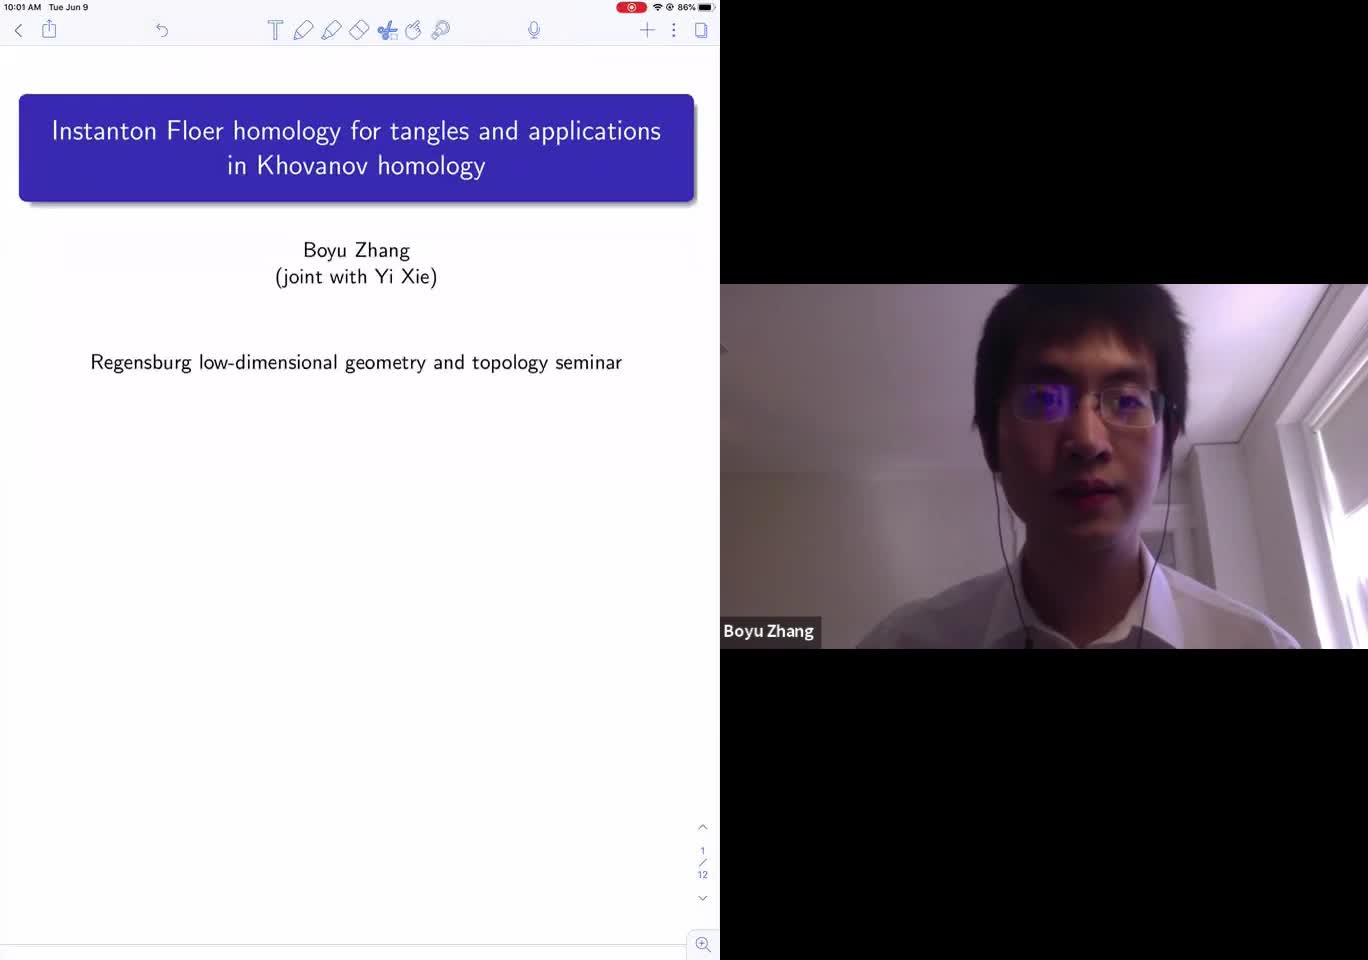 Boyu Zhang: Instanton Floer homology for tangles and applications in Khovanov homology (RLGTS, 9 June 2020)